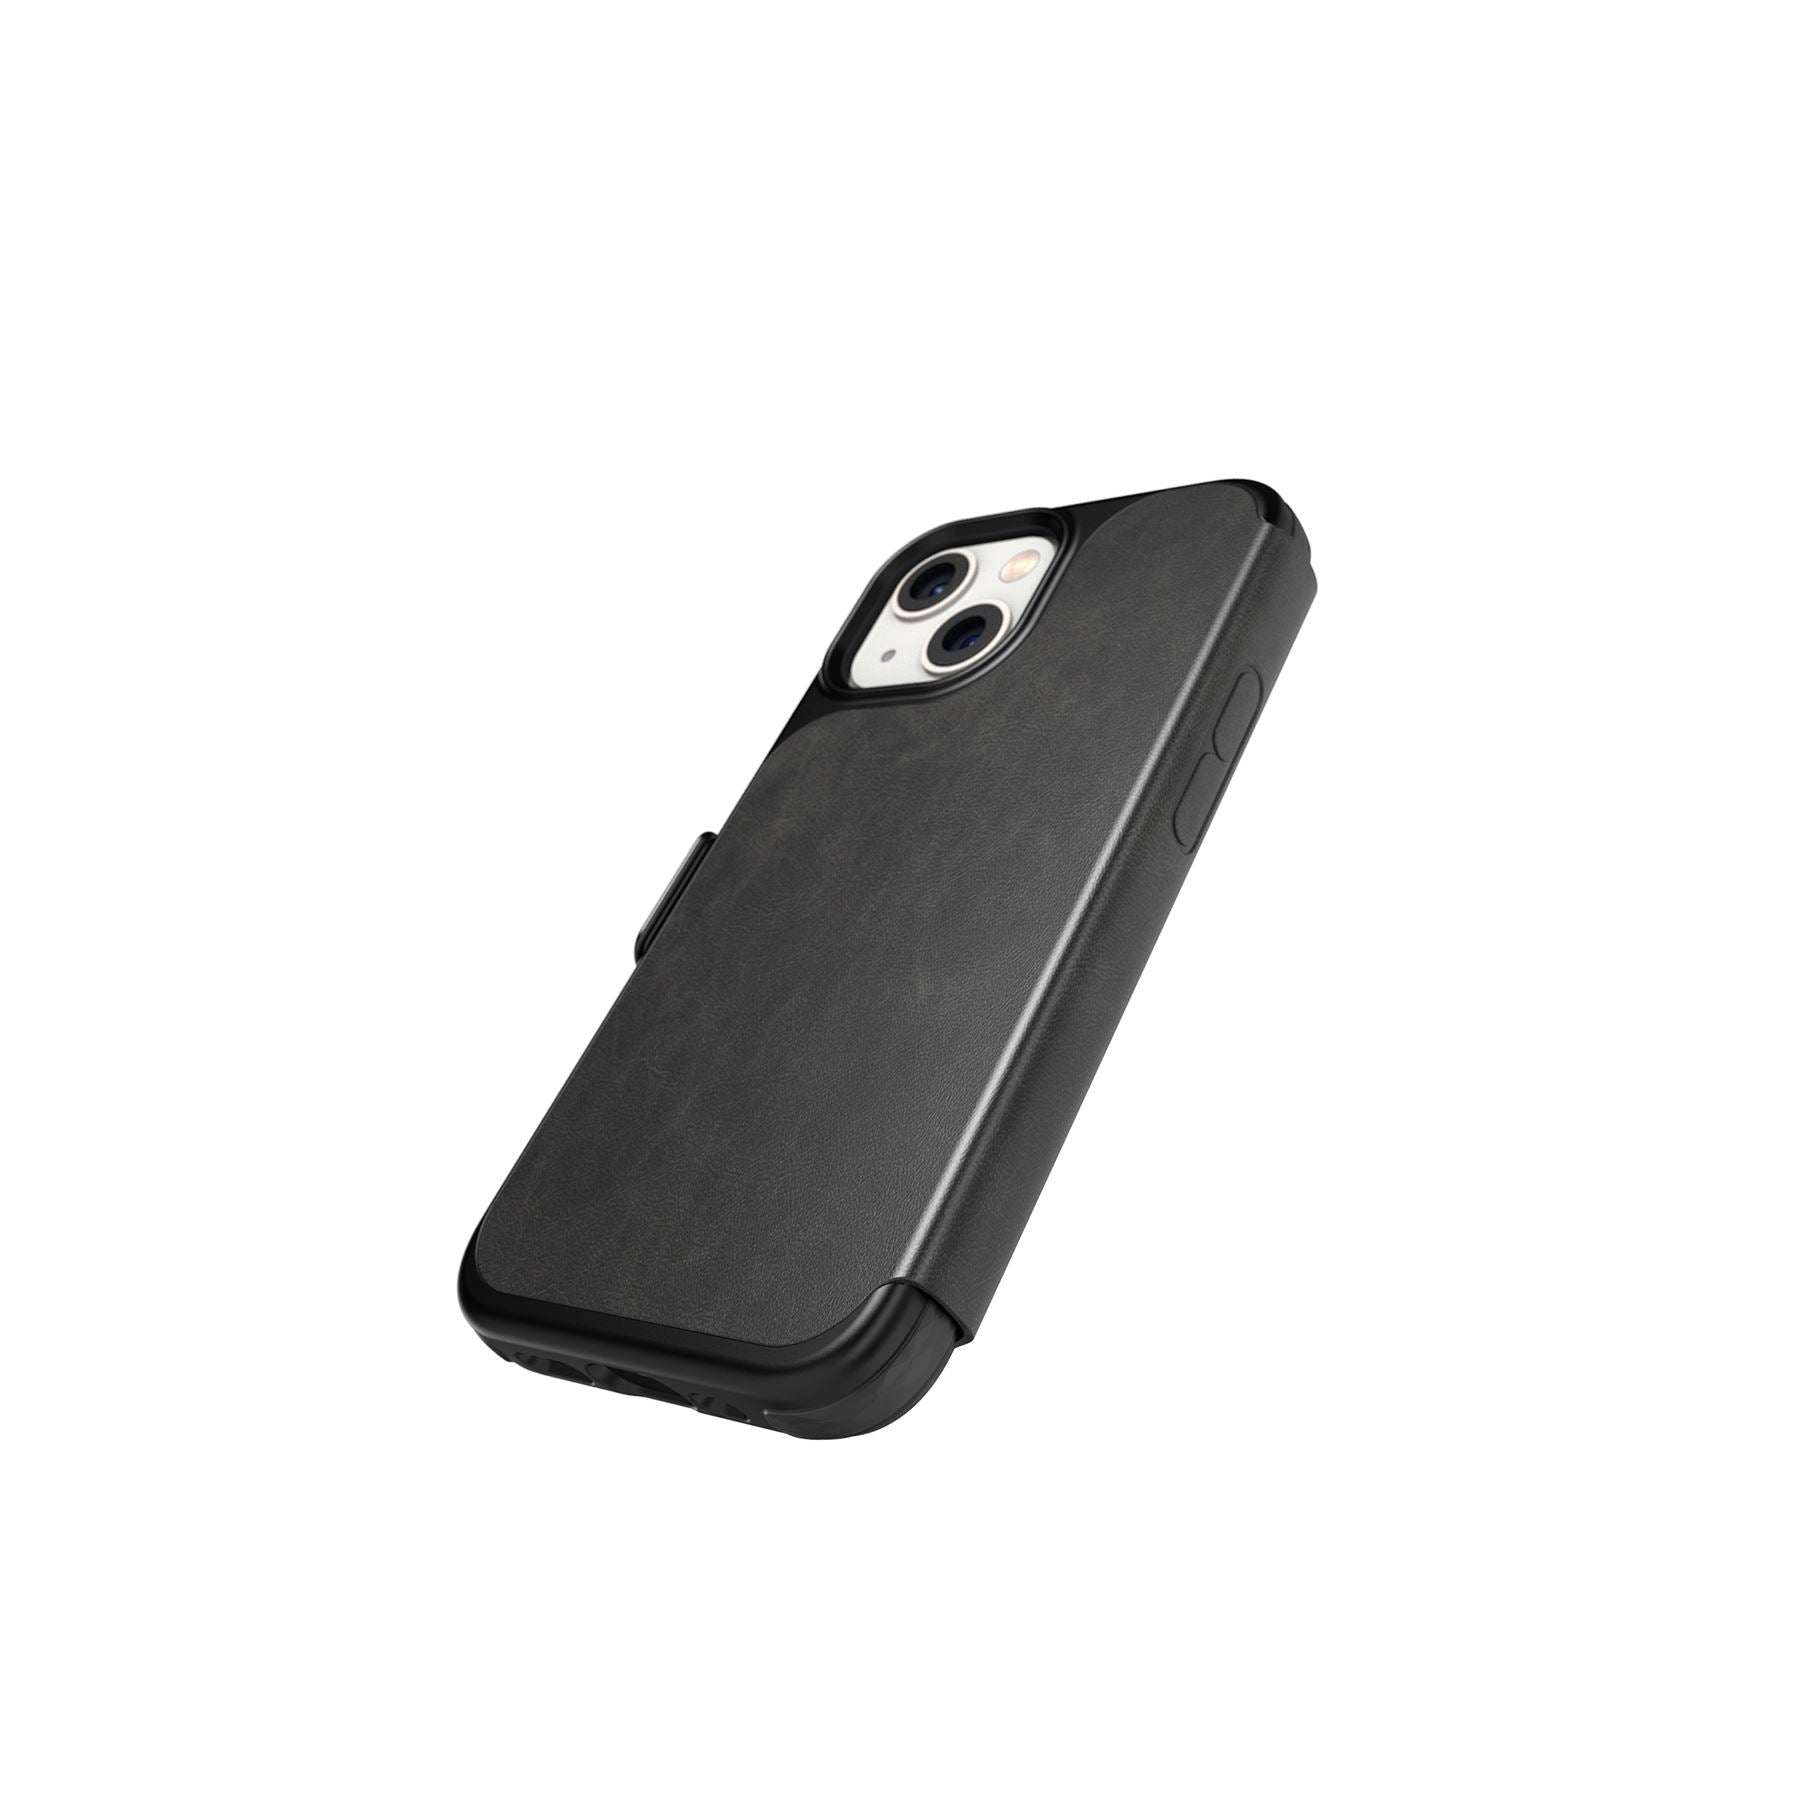 Evo Max - Apple iPhone 13 mini Case with Holster - Off Black 